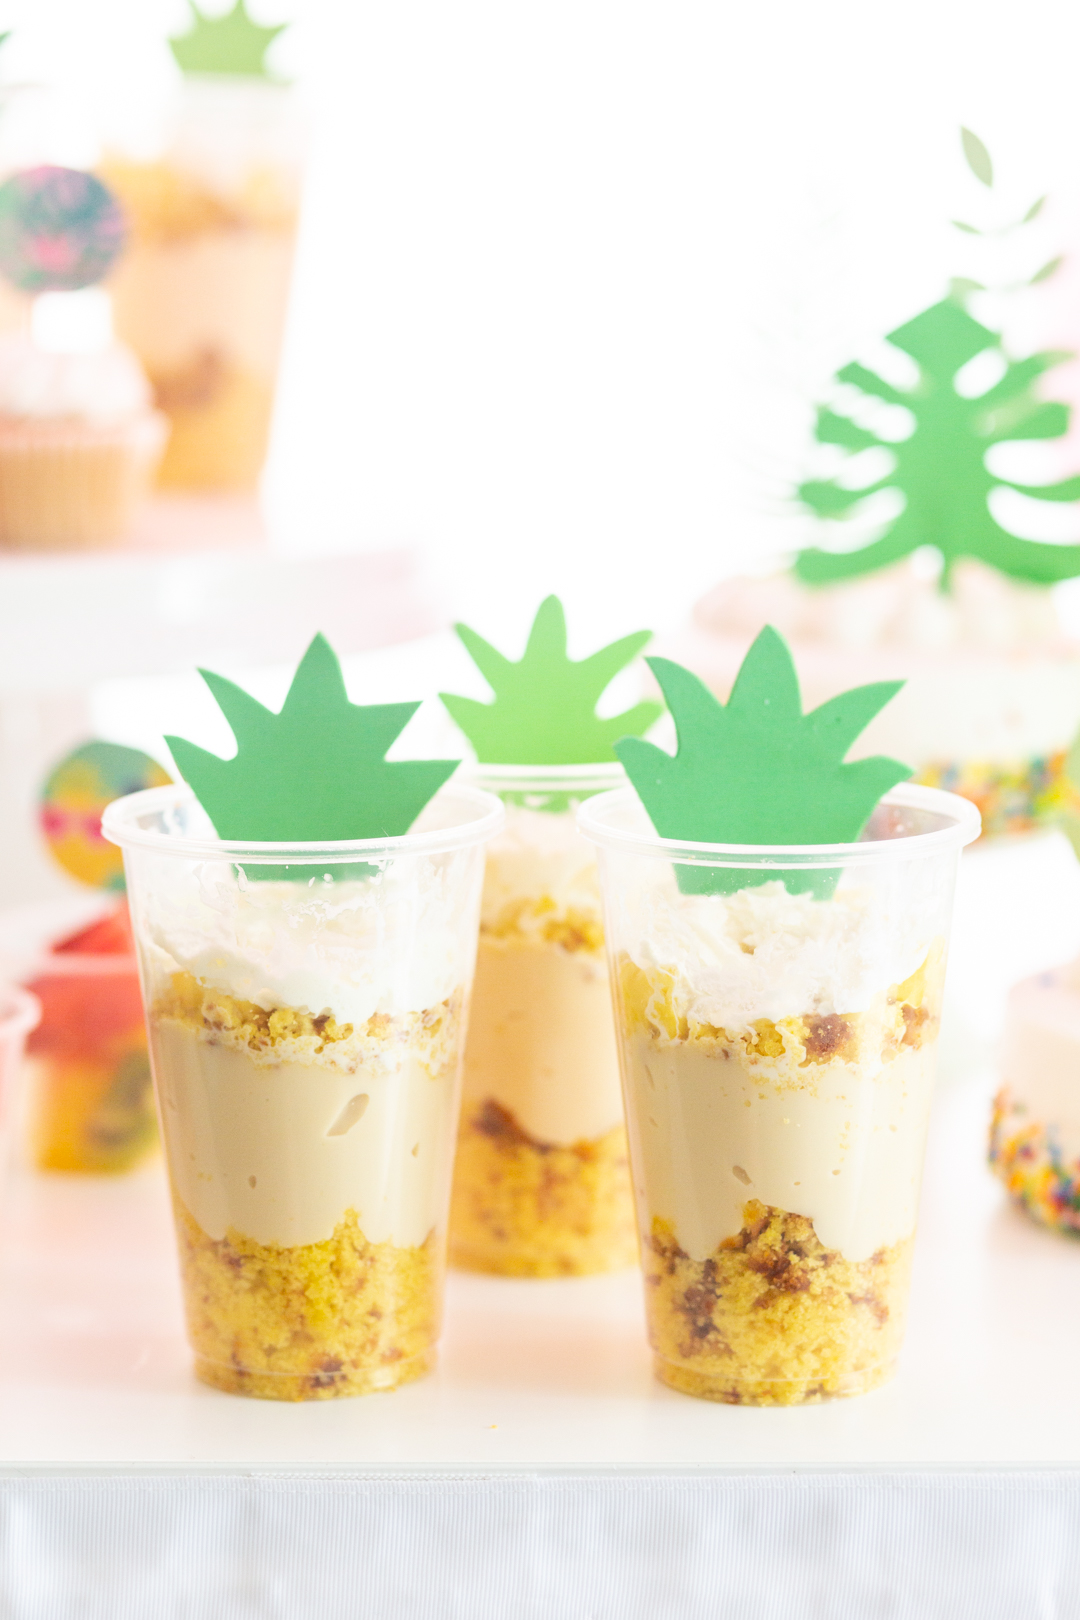 pineapple trifle desserts in individual clear cups